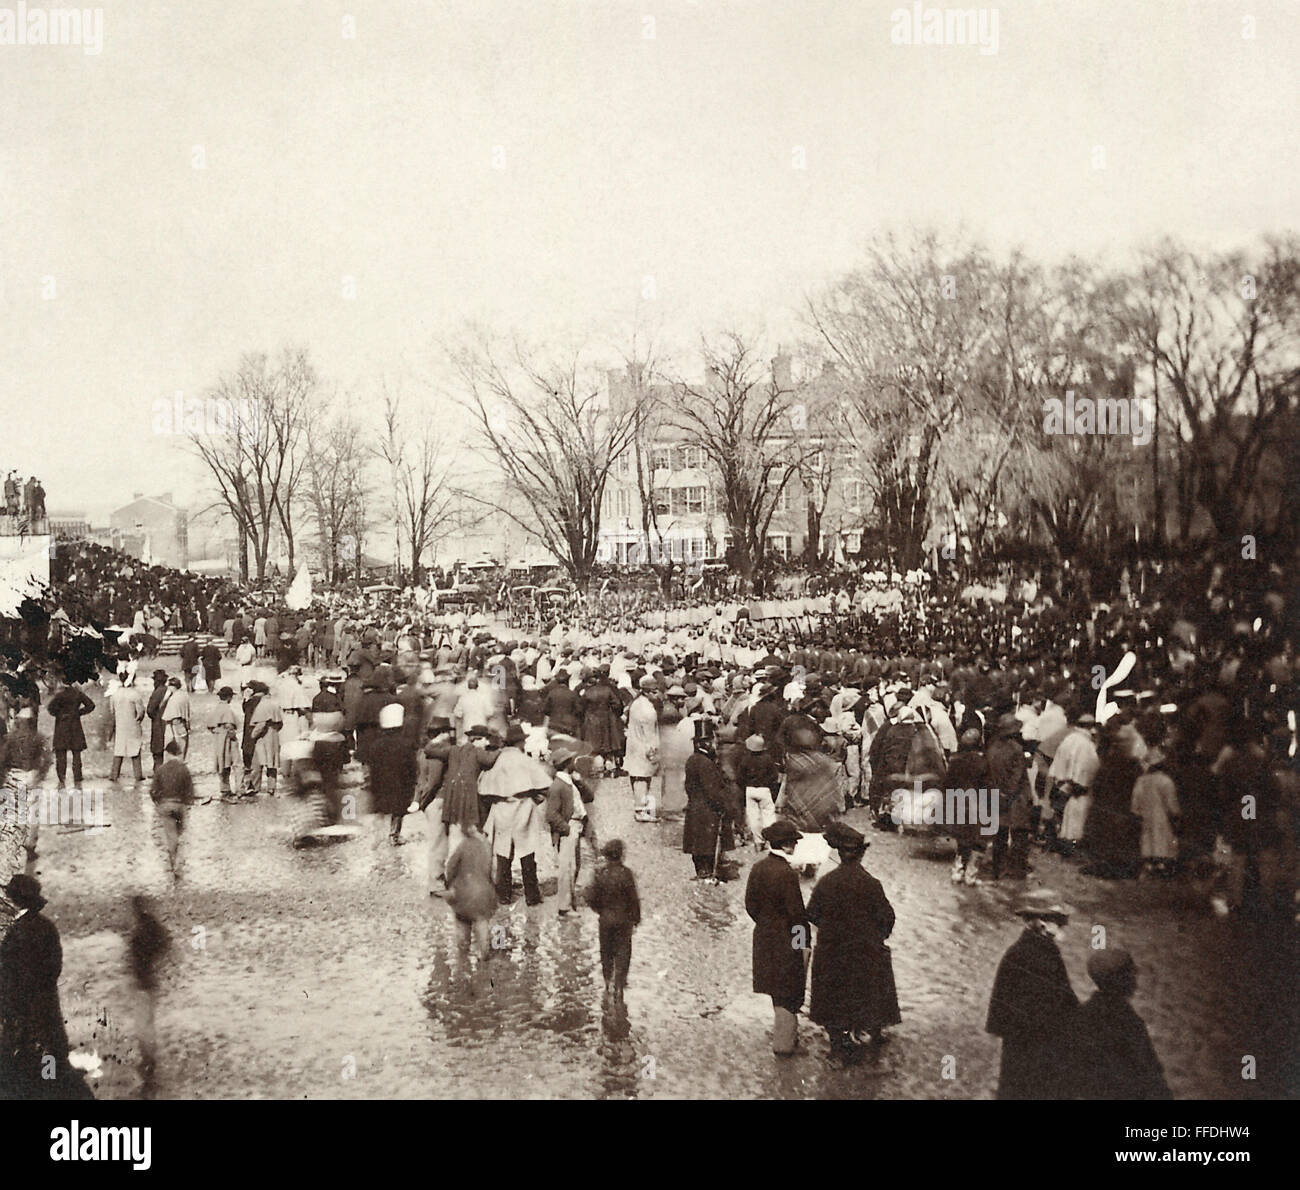 LINCOLN'S INAUGURATION. /nThe second inauguration of Abraham Lincoln as President of the United States, Washington, D.C., 4 March 1865. The crowd includes African American troops who marched in the inaugural parade. Stock Photo